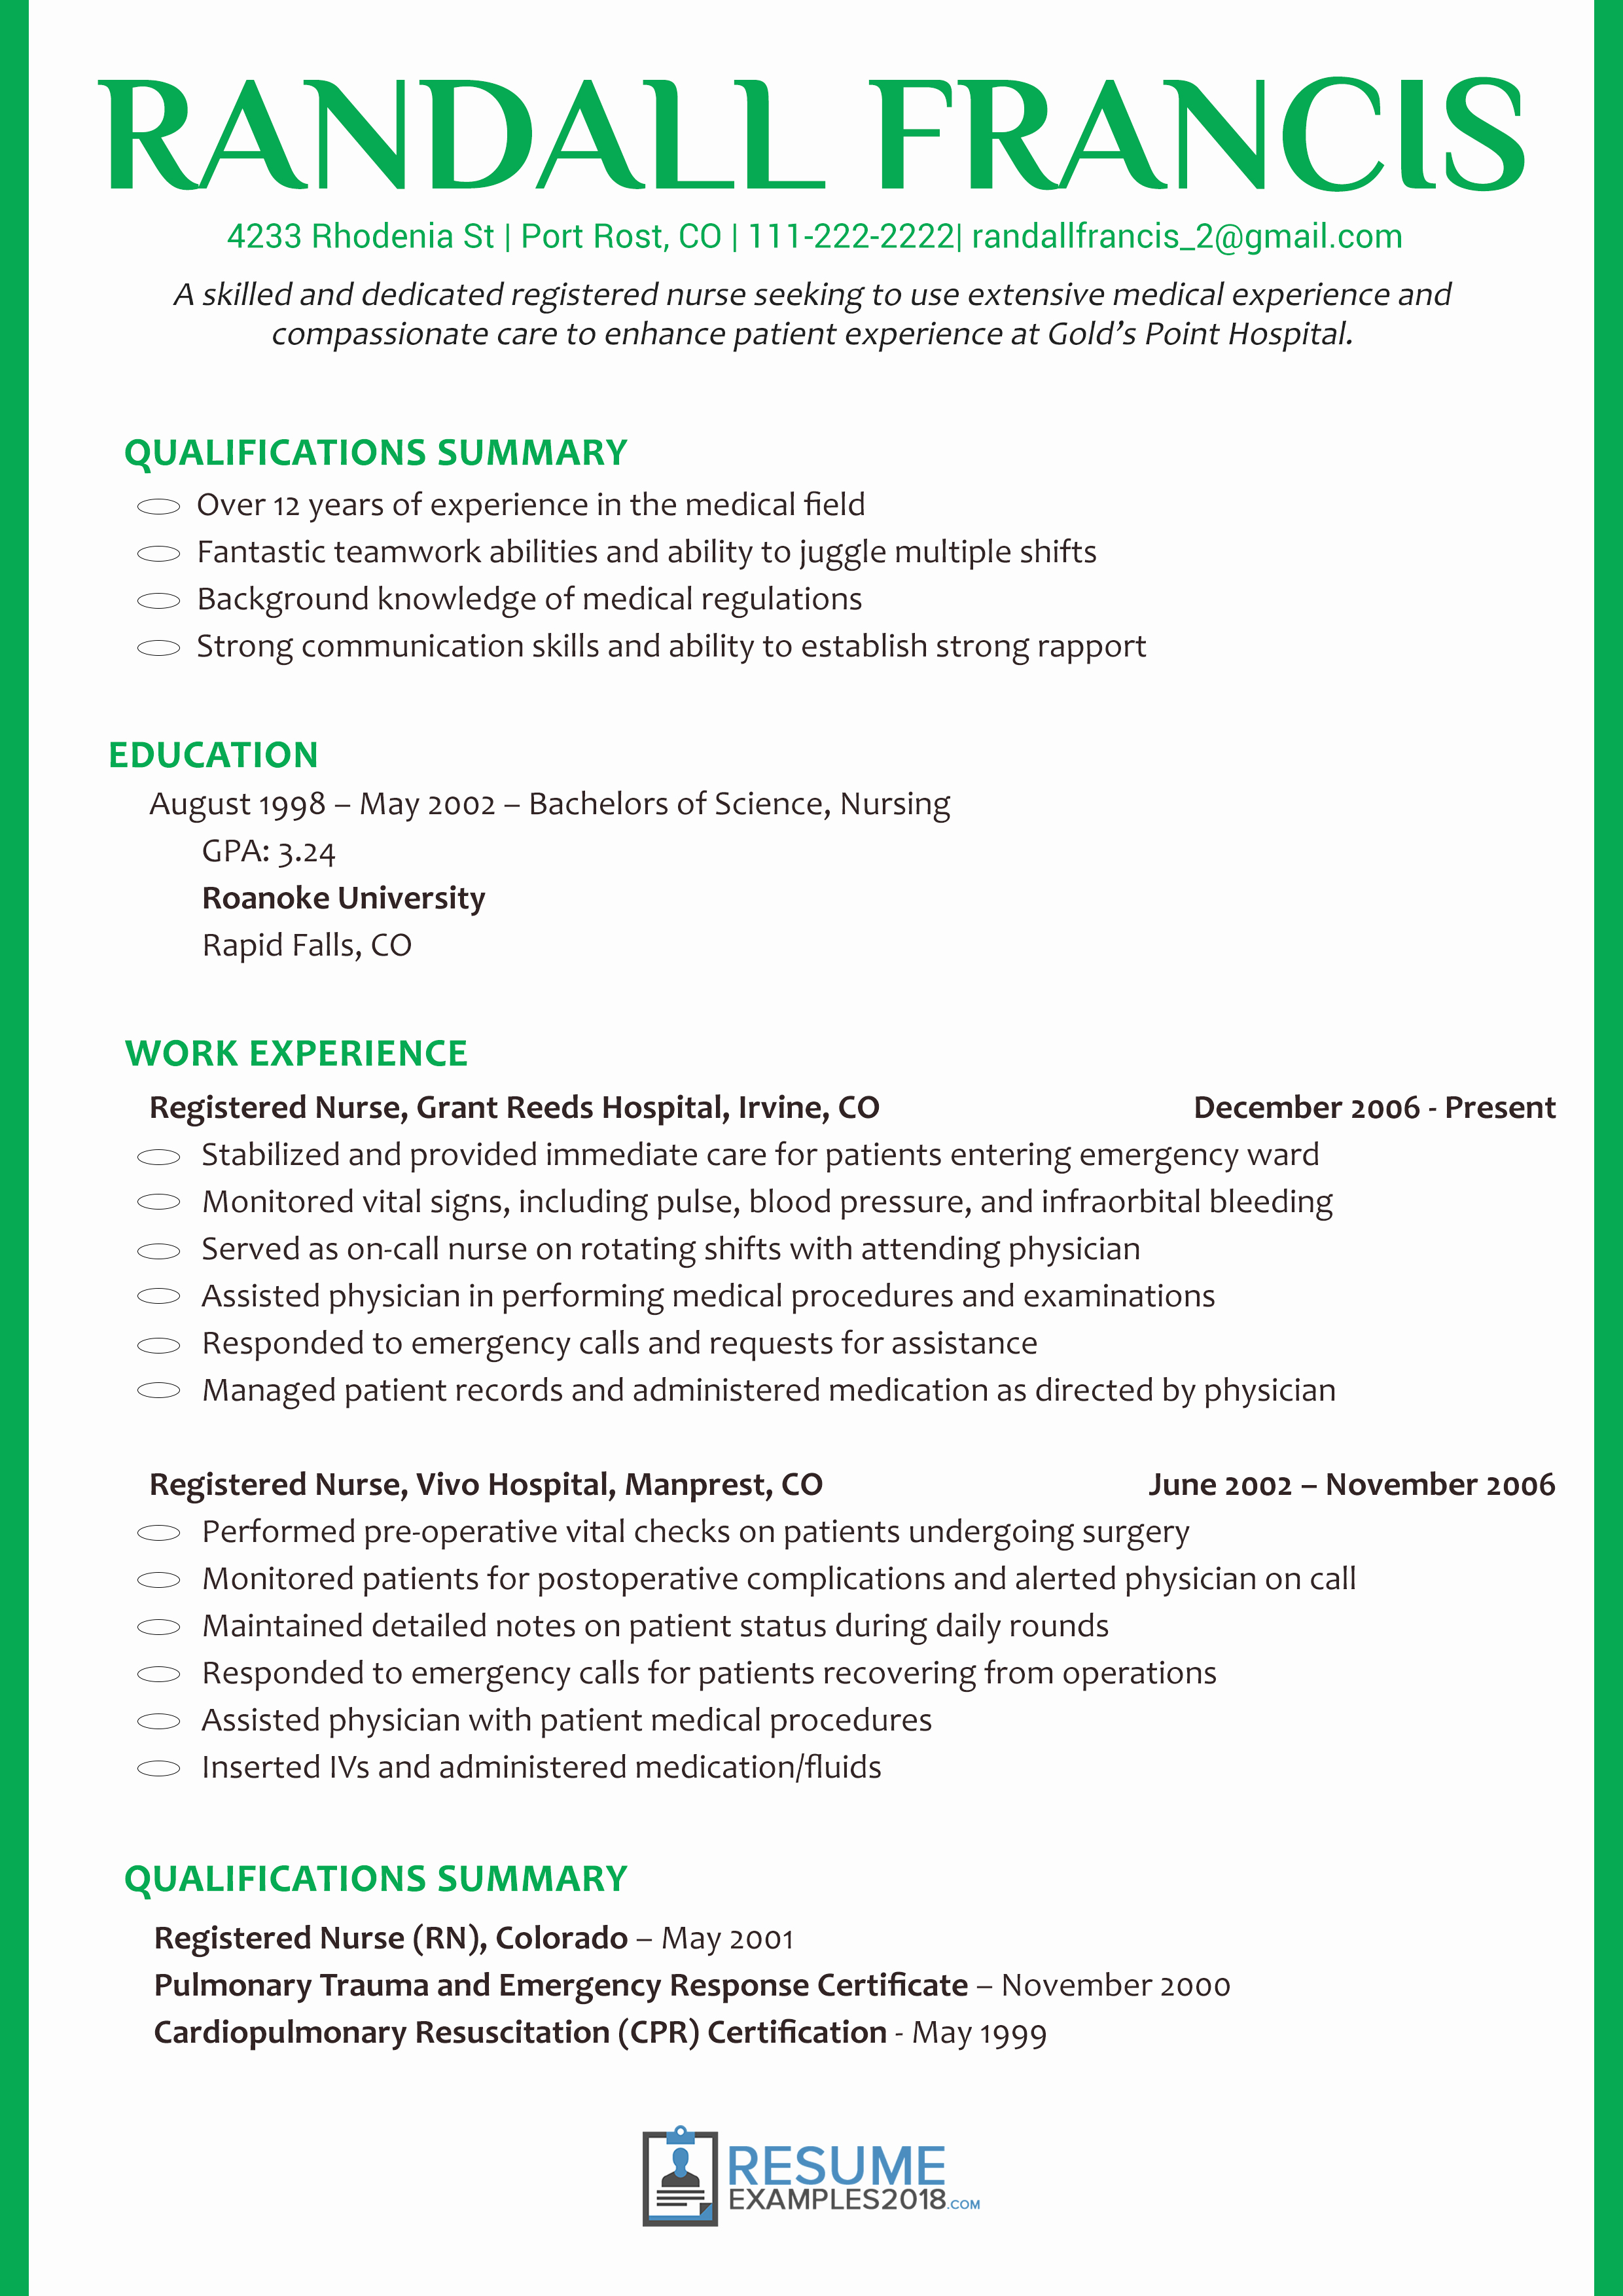 Get Nursing Resume Examples 2019 and Land Your Dream Job